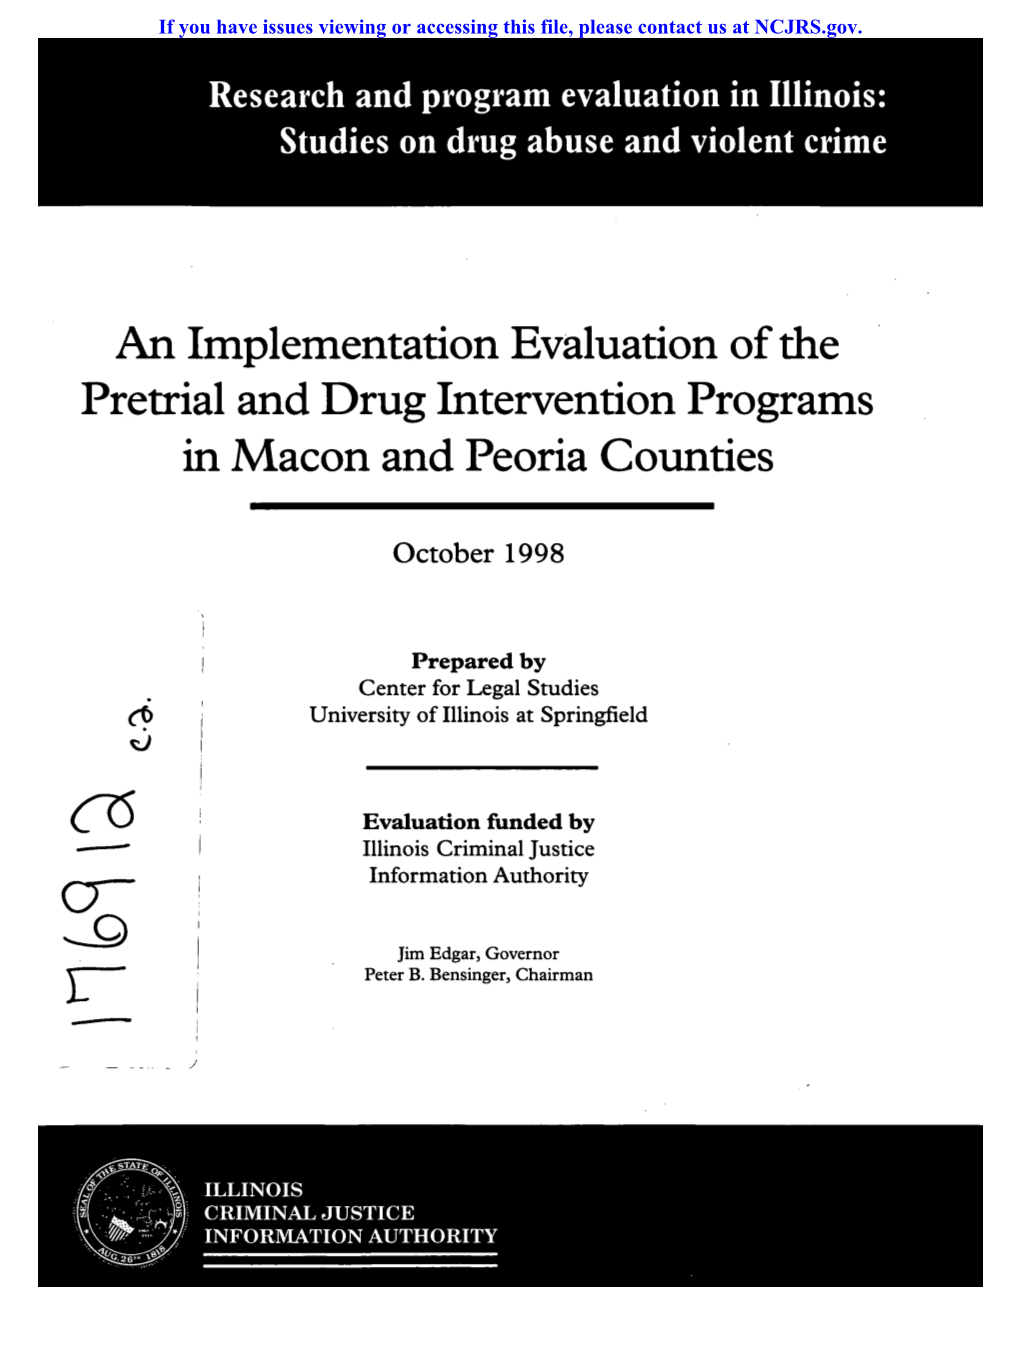 An Implementation Evaluation of the Pretrial and Drug Intervention Programs in Macon and Peoria Counties